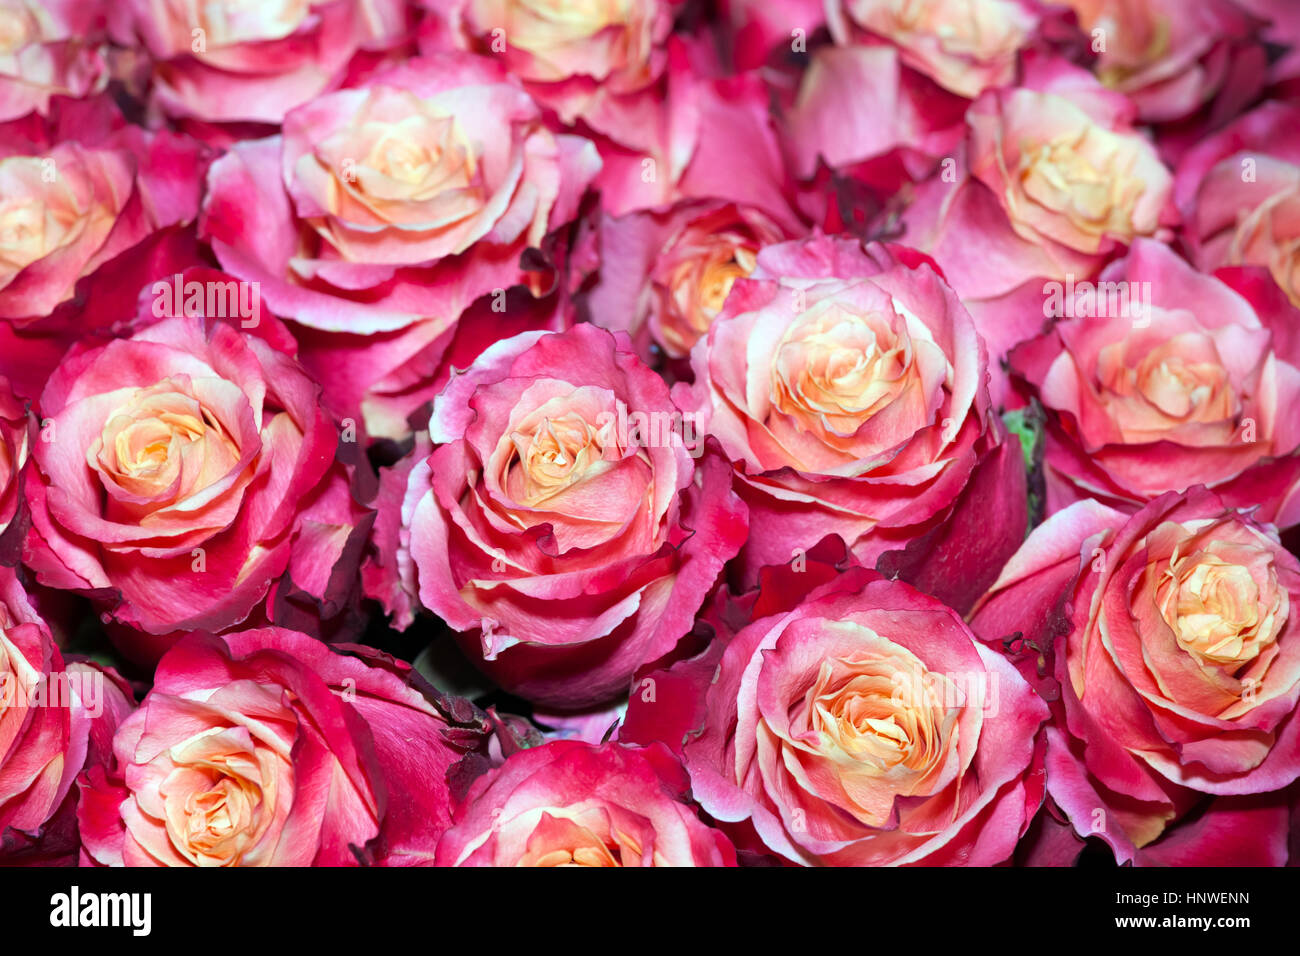 Colorful roses background Stock Photo